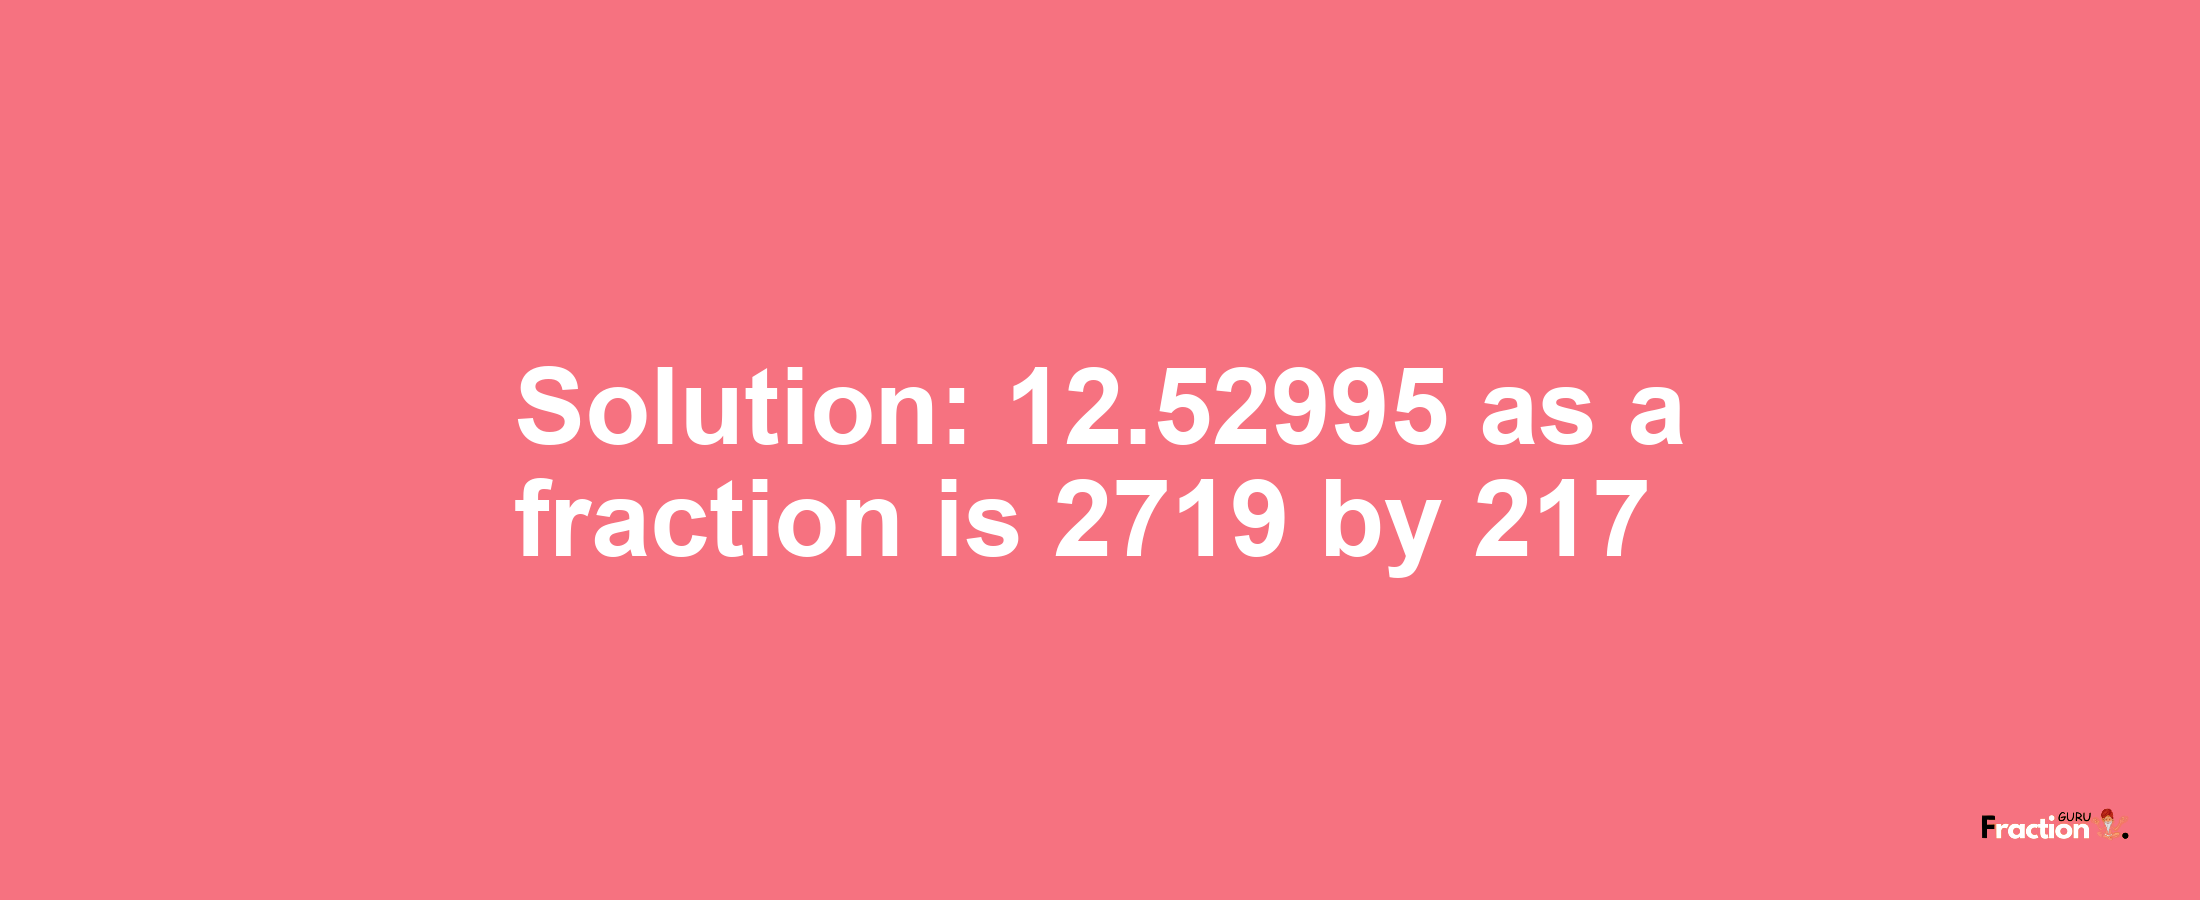 Solution:12.52995 as a fraction is 2719/217